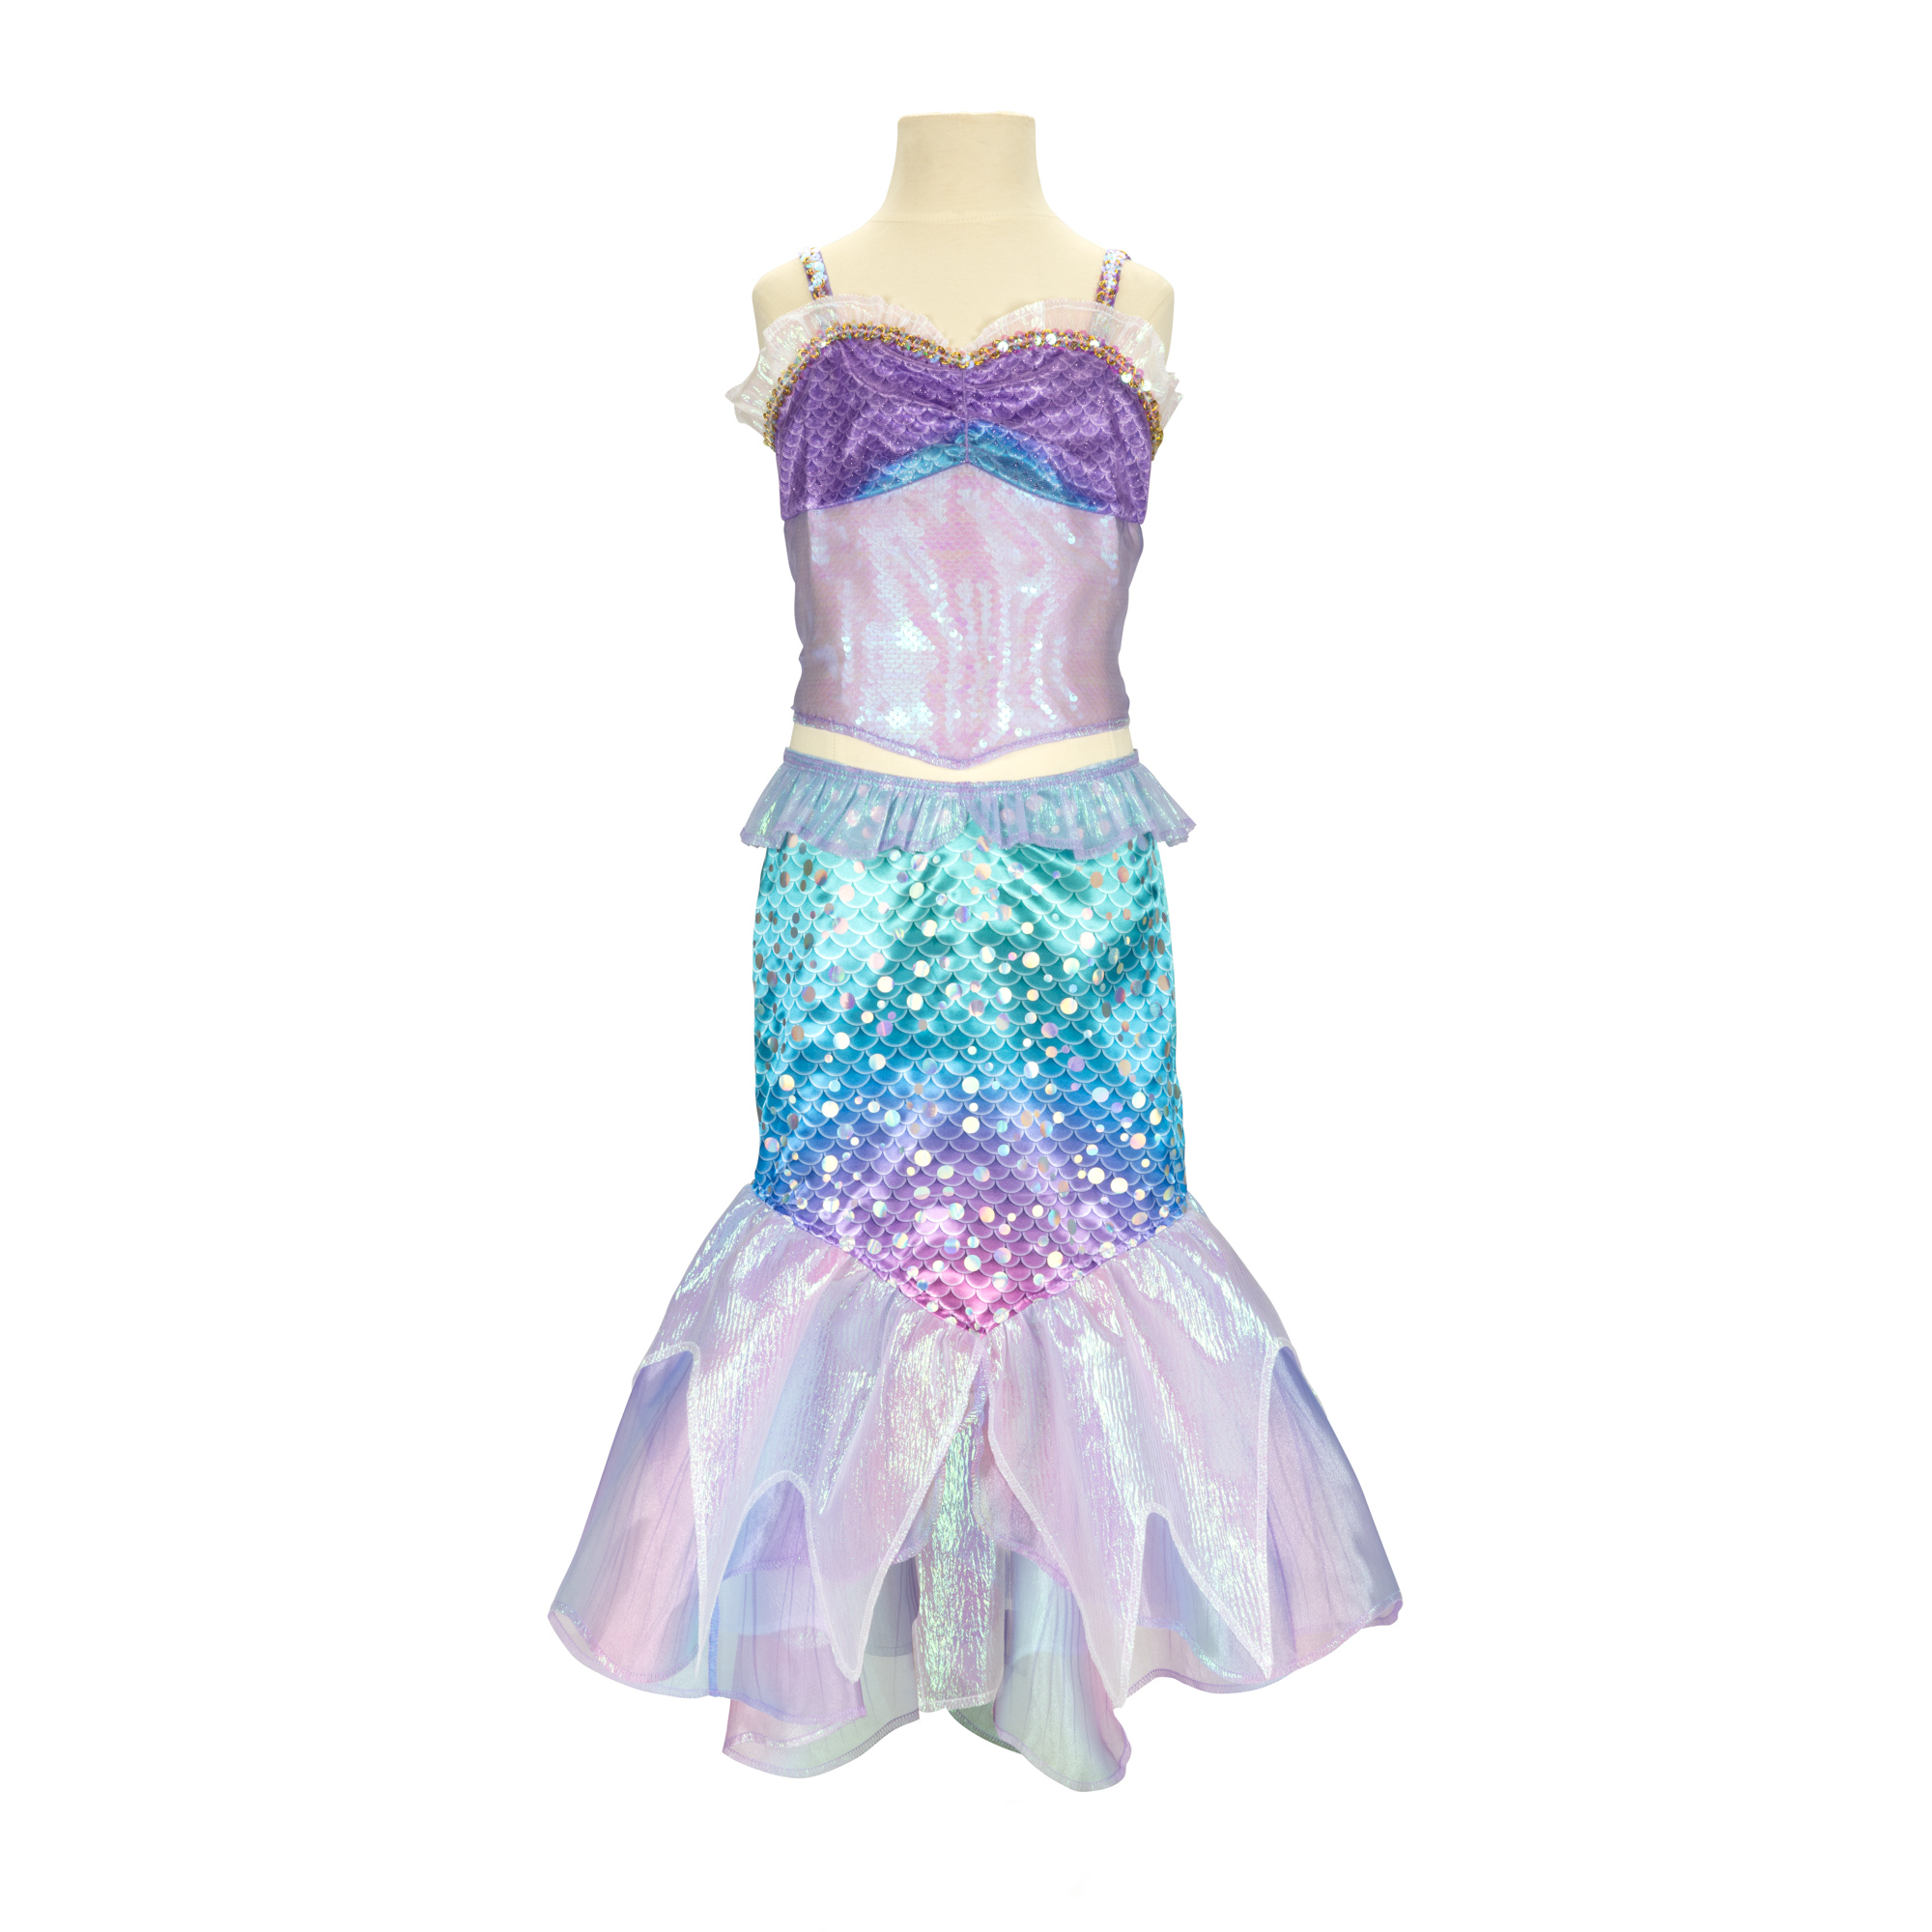 Disney Little Mermaid Ariel Two Piece Mermaid Deluxe Multicolored Fashion Dress Size 4 to 6 - image 1 of 8